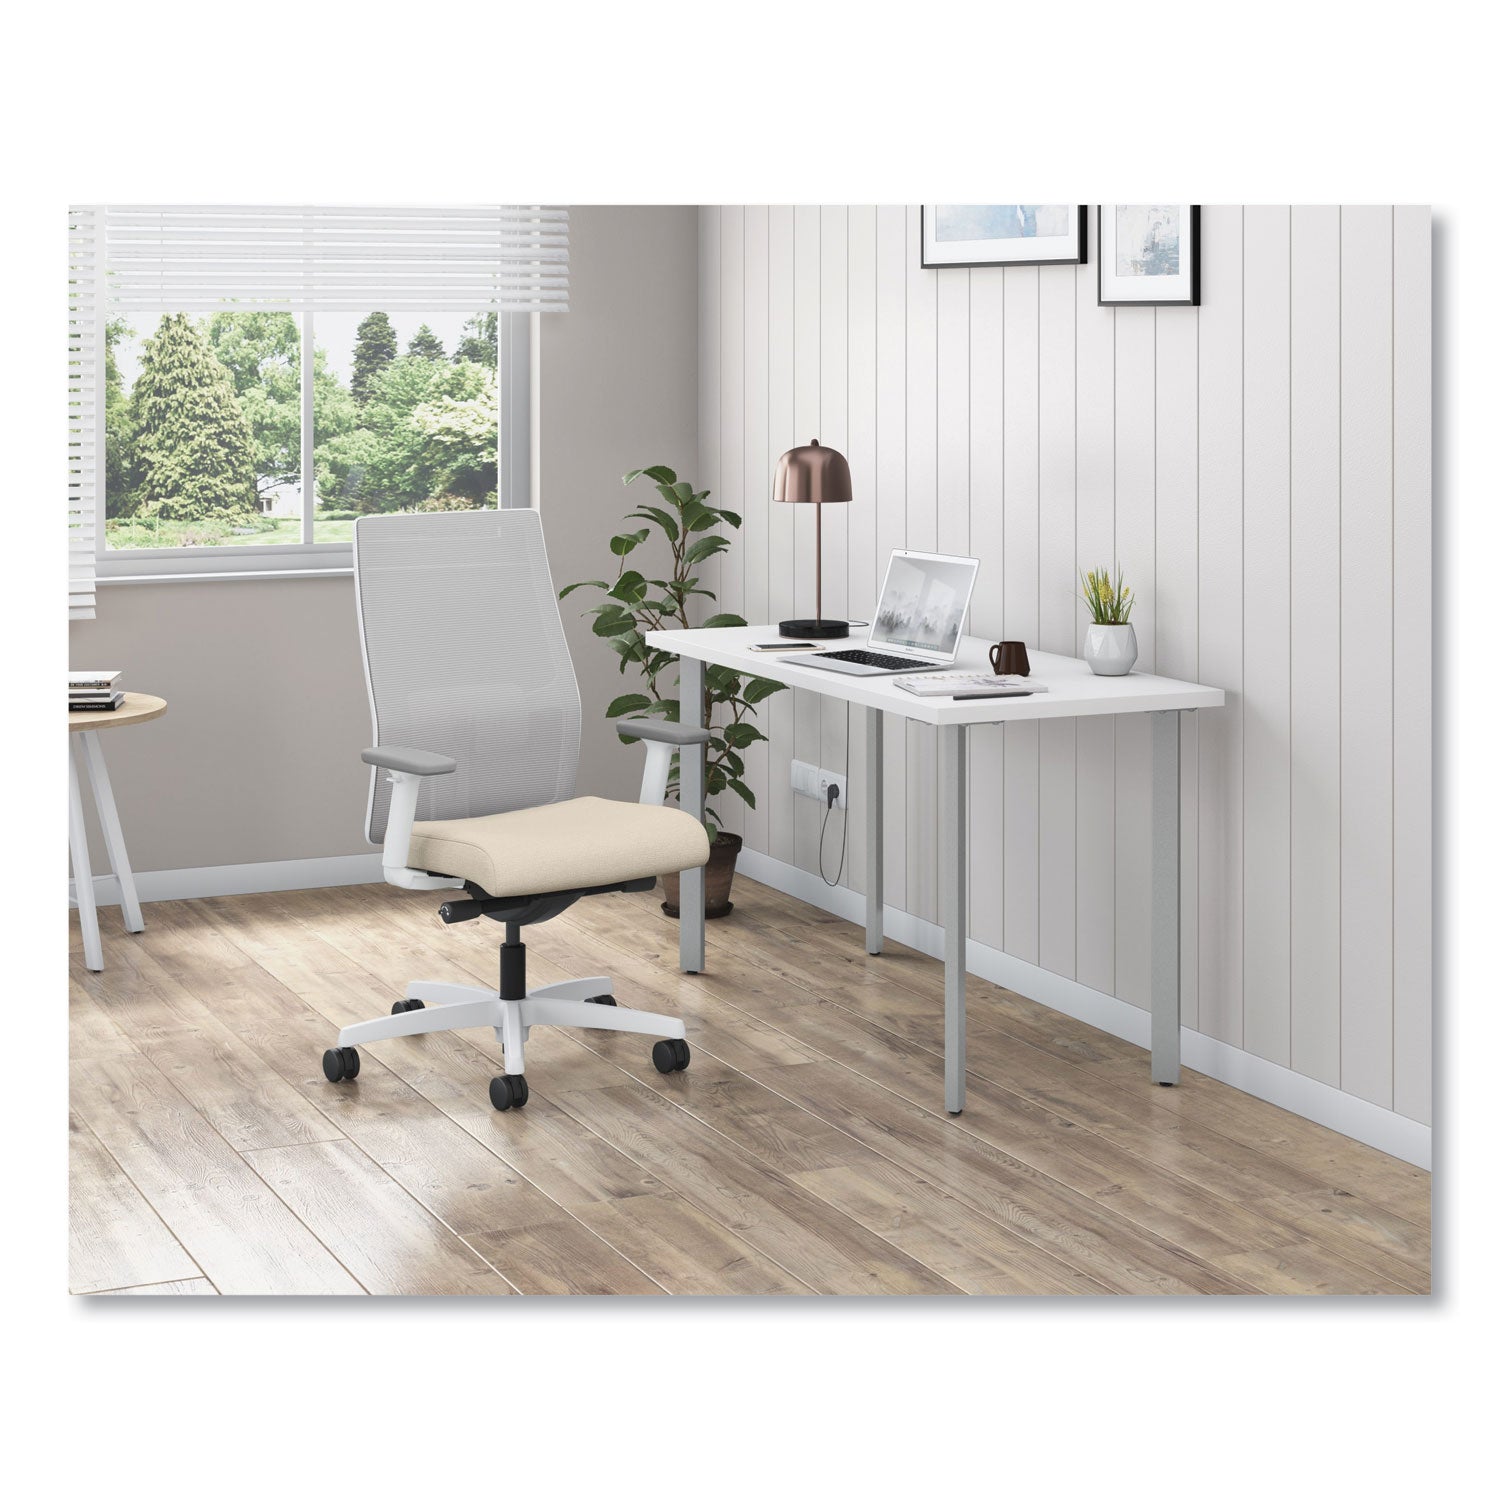 ignition-20-4-way-stretch-mid-back-task-chair-white-adjustable-lumbar-support-biscotti-fog-white-ships-in-7-10-bus-days_honi2mm2afh11wx - 3